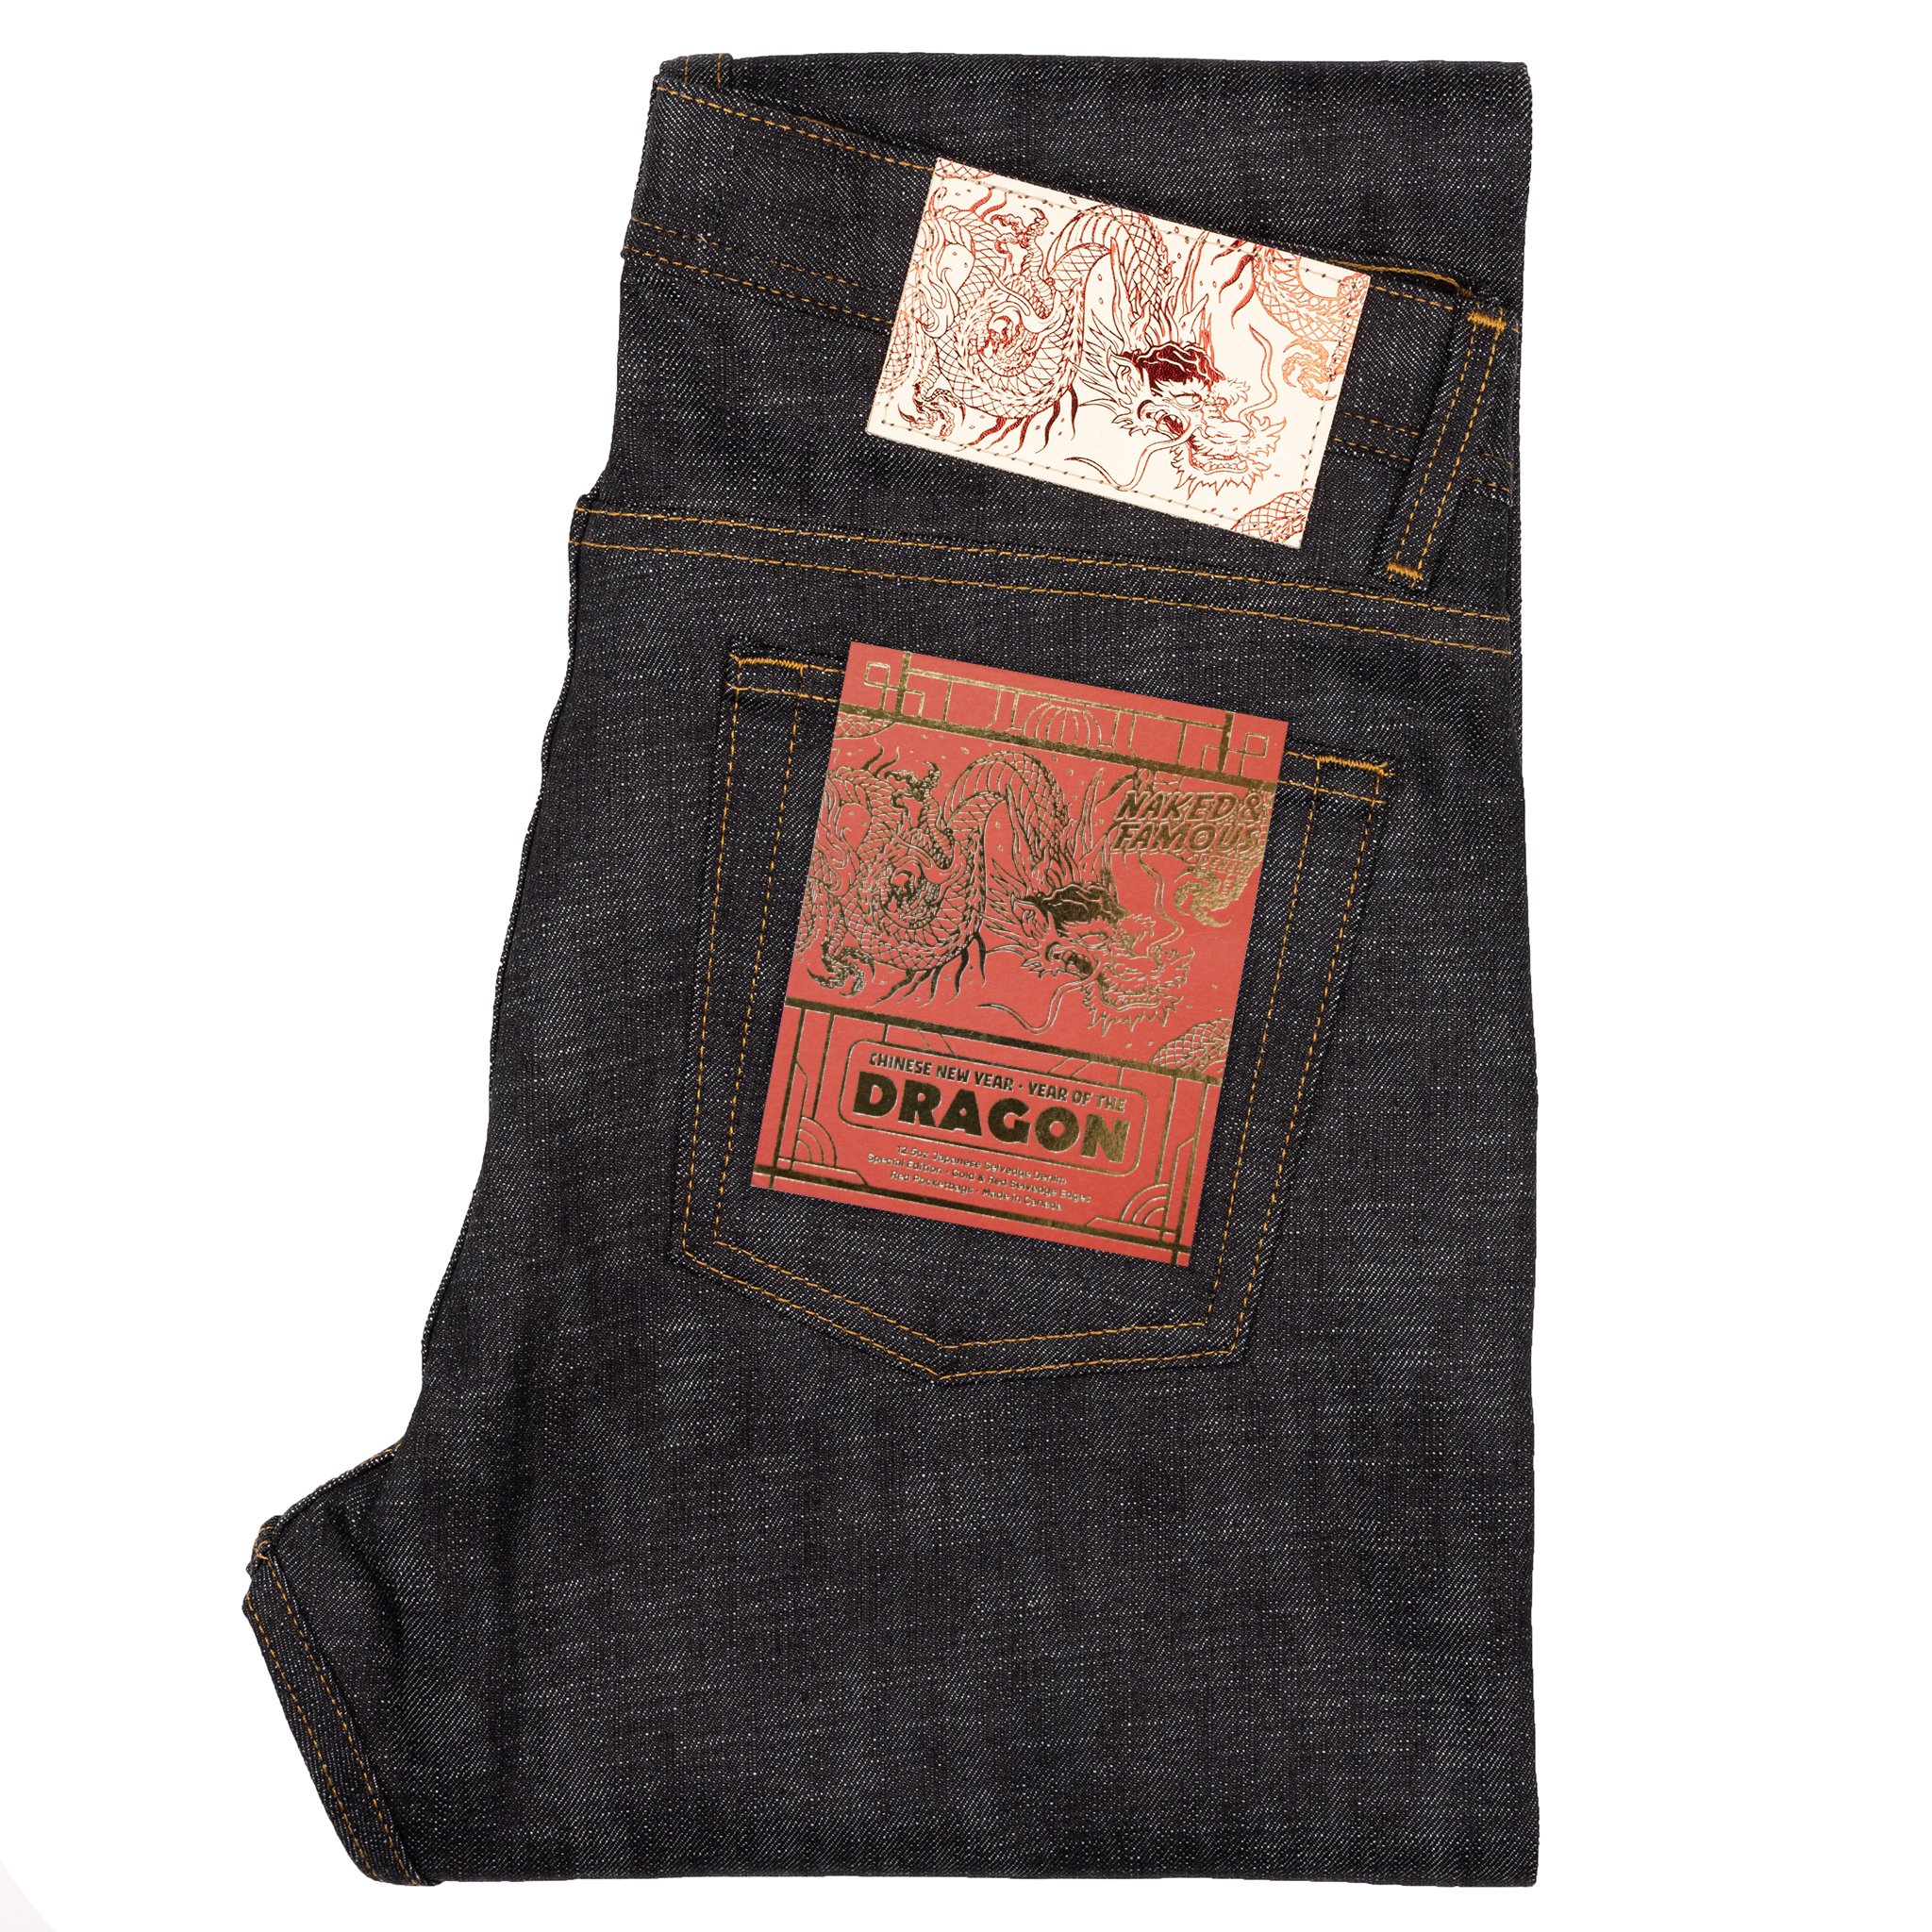  Chinese New Year - Year of The Dragon Jeans 